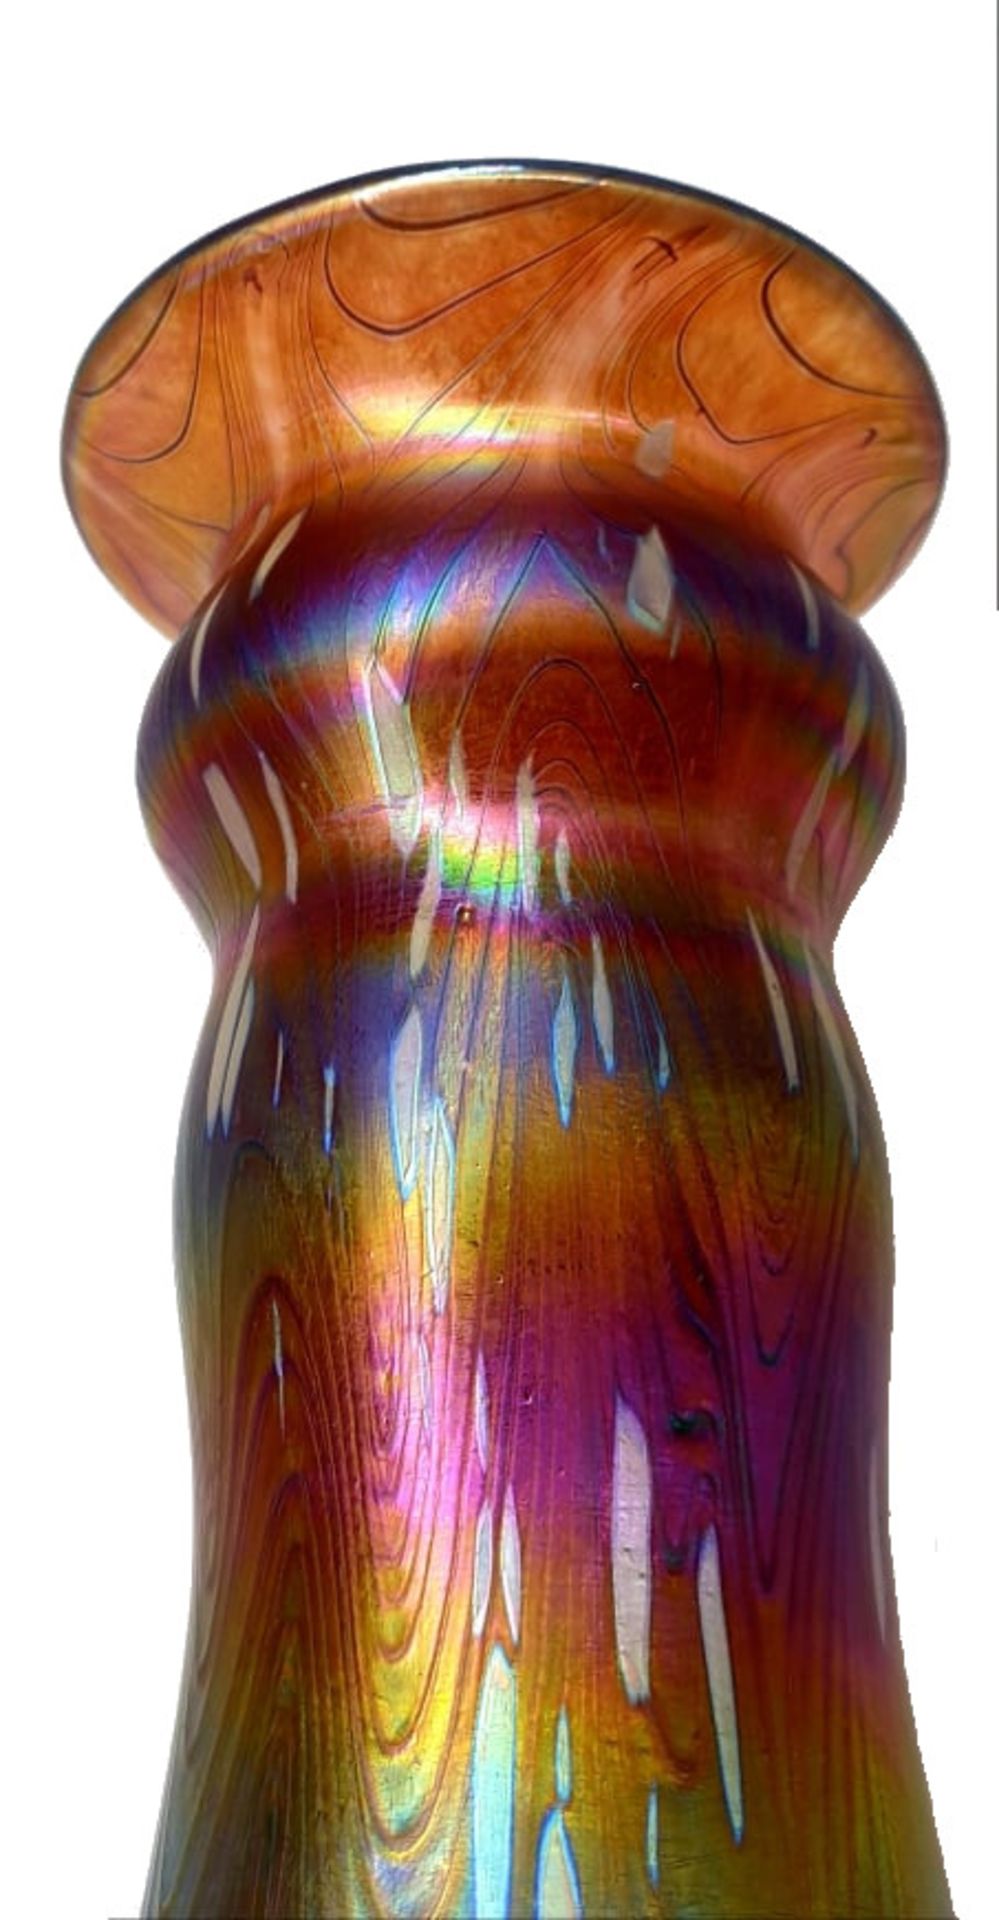 Irredescent Vase - Image 2 of 6